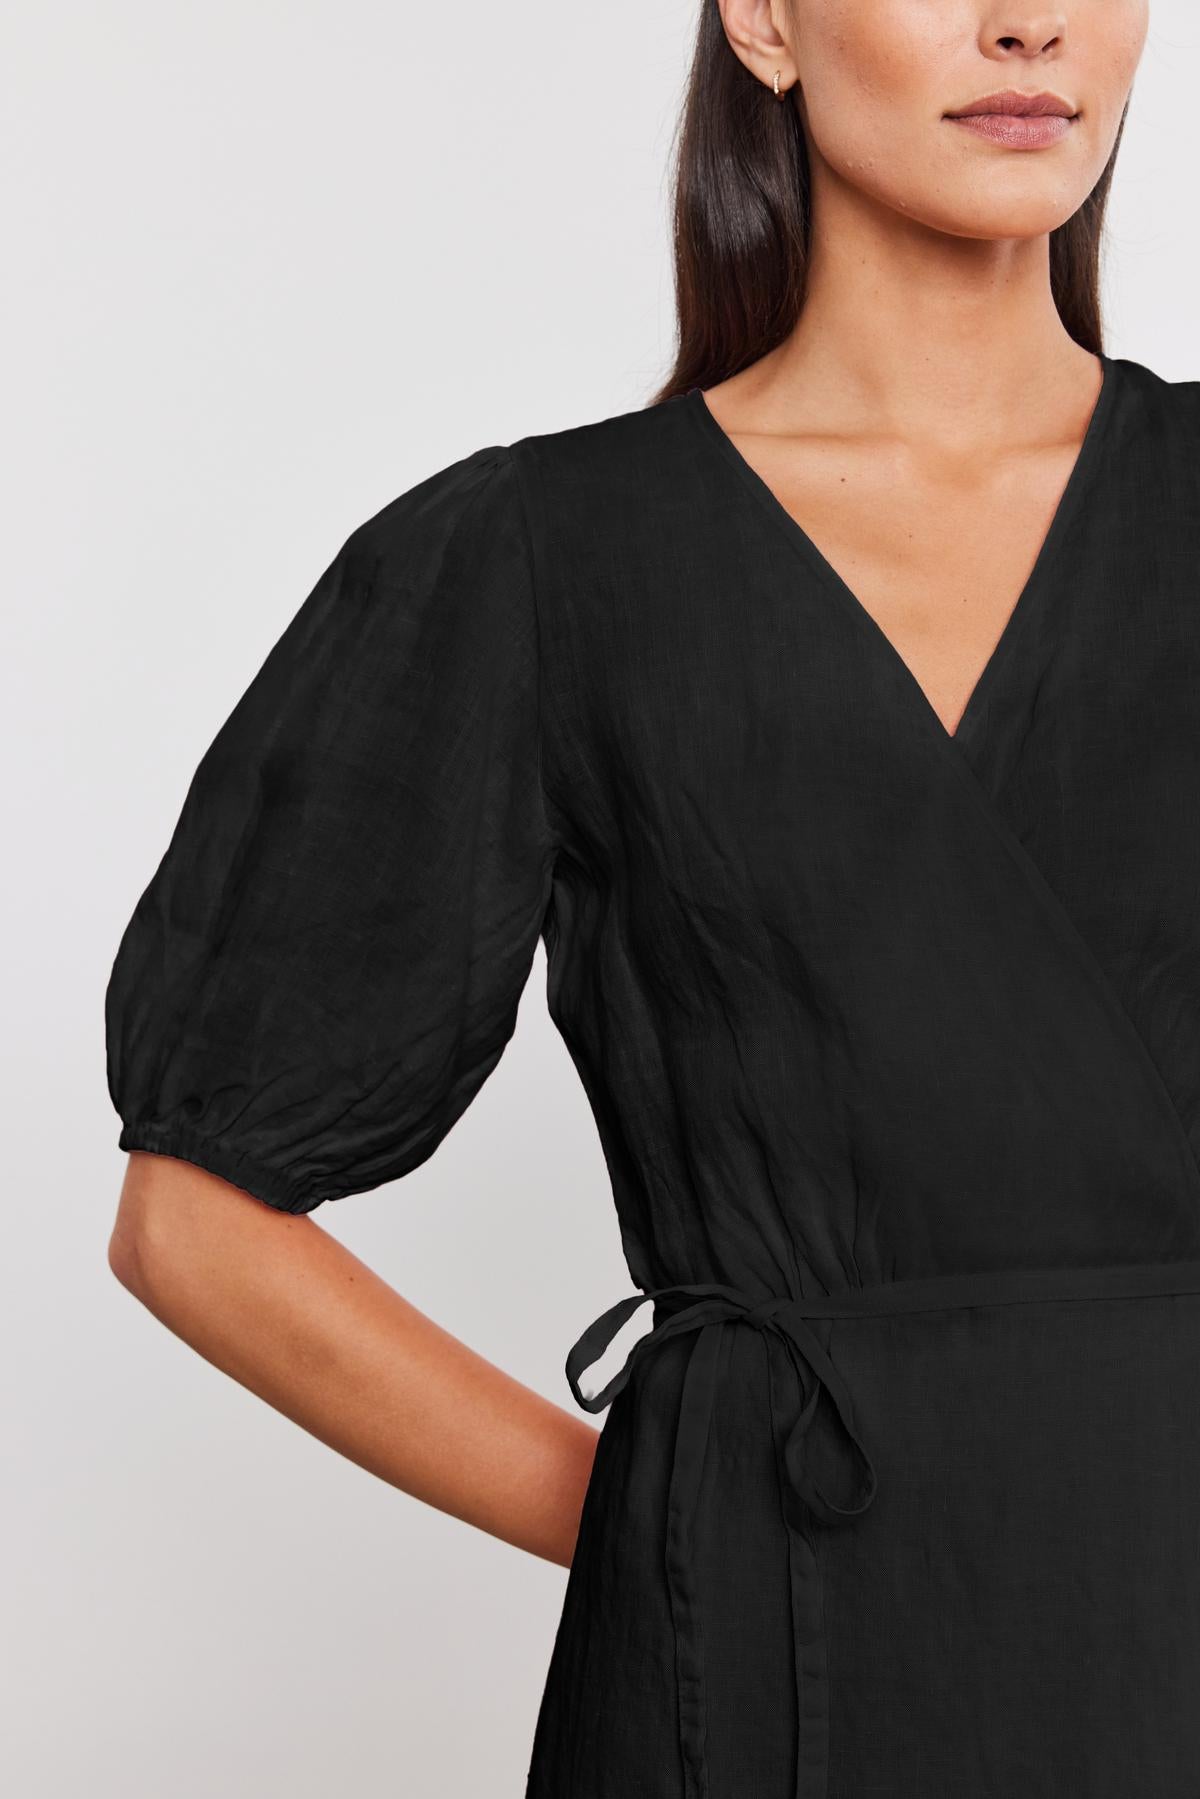 Woman wearing a black v-neck wrap Dalede Linen Dress with puffed sleeves and a tie at the waist, cropped view focusing on the upper body.-36917057945793